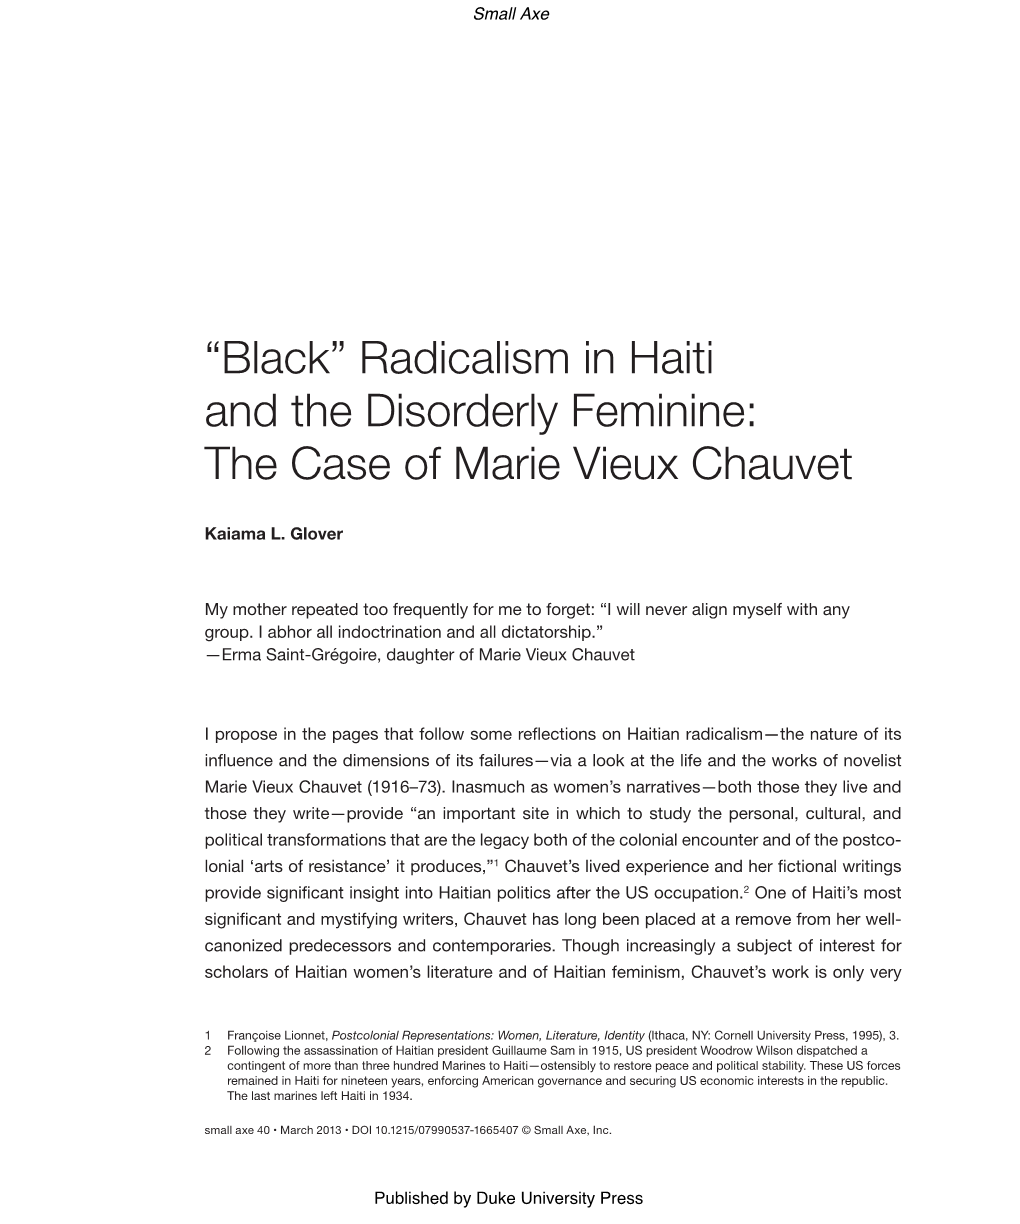 “Black” Radicalism in Haiti and the Disorderly Feminine: the Case of Marie Vieux Chauvet